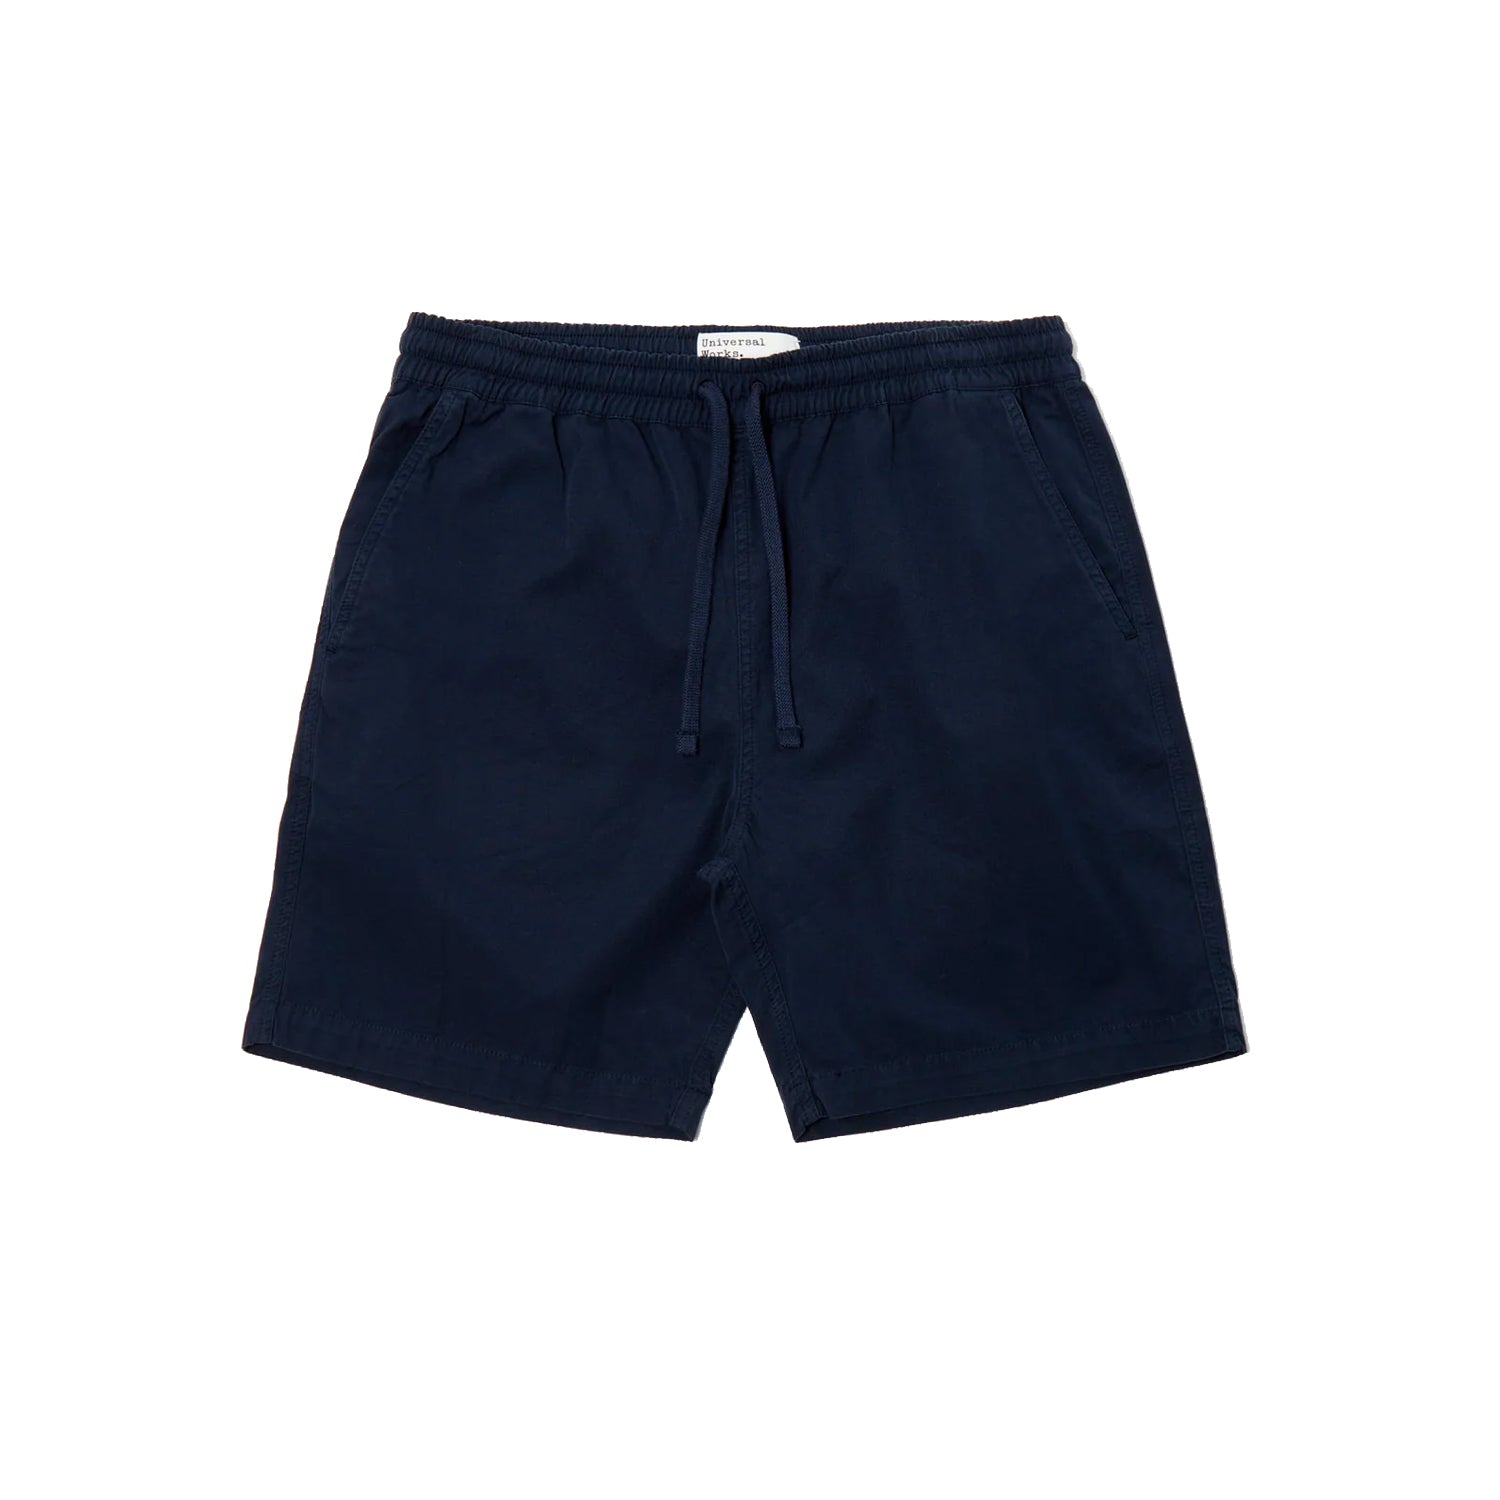 Beach Short - Summer Canvas NAVY
A high-quality mid-weight canvas, durable and tightly woven for a perfect crisp summer cotton fabric.
 
• Product Code: 28535.
• Elasticated waist with cord.
• No fly.
• Two front pockets.
• Single rear button-flap patch pocket.
• Tape detail.
• Fabric Content: 100% Cotton, 100% Cotton Trim.
• Washcare: Wash at 30 degrees. Do not bleach. Do not tumble dry. Warm iron. Do not dry clean. Wash like colours together. UNIVERSAL WORKS